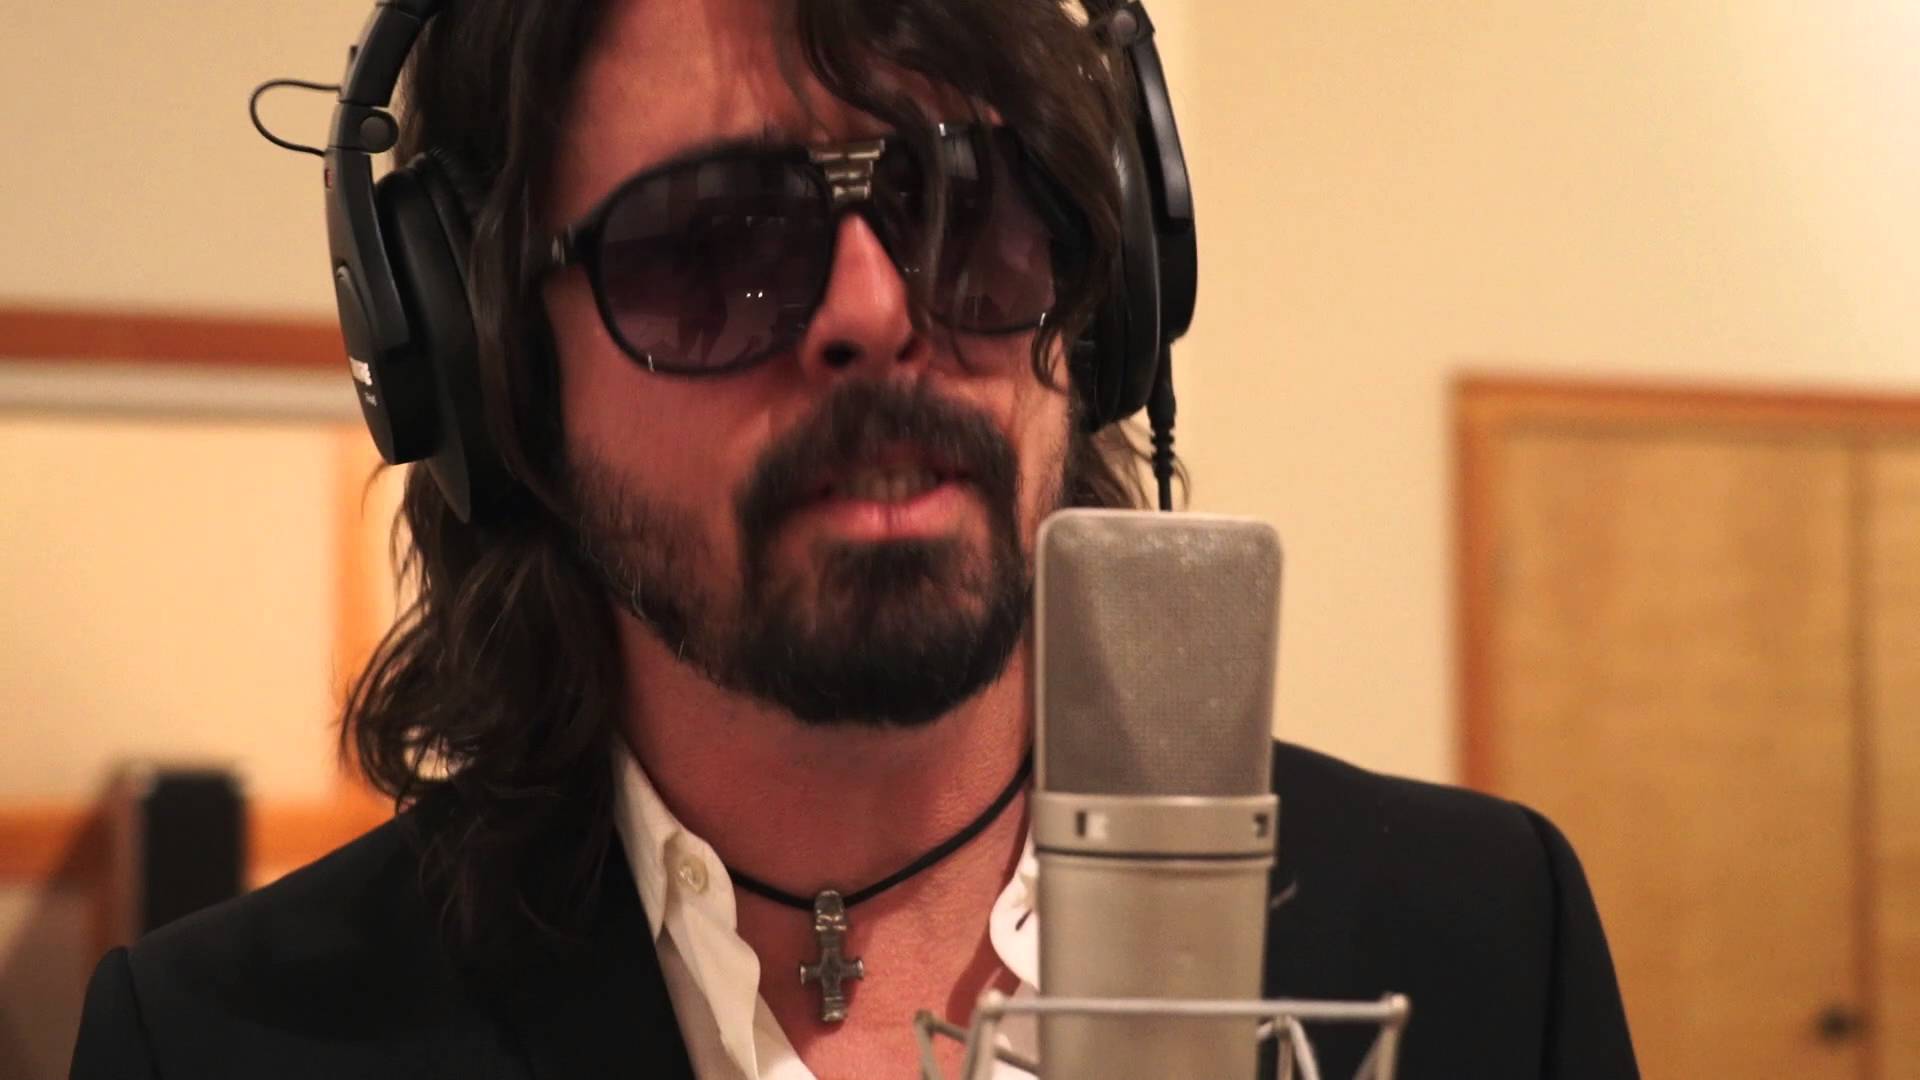 Foo Fighters Make Hilarious Announcement Video